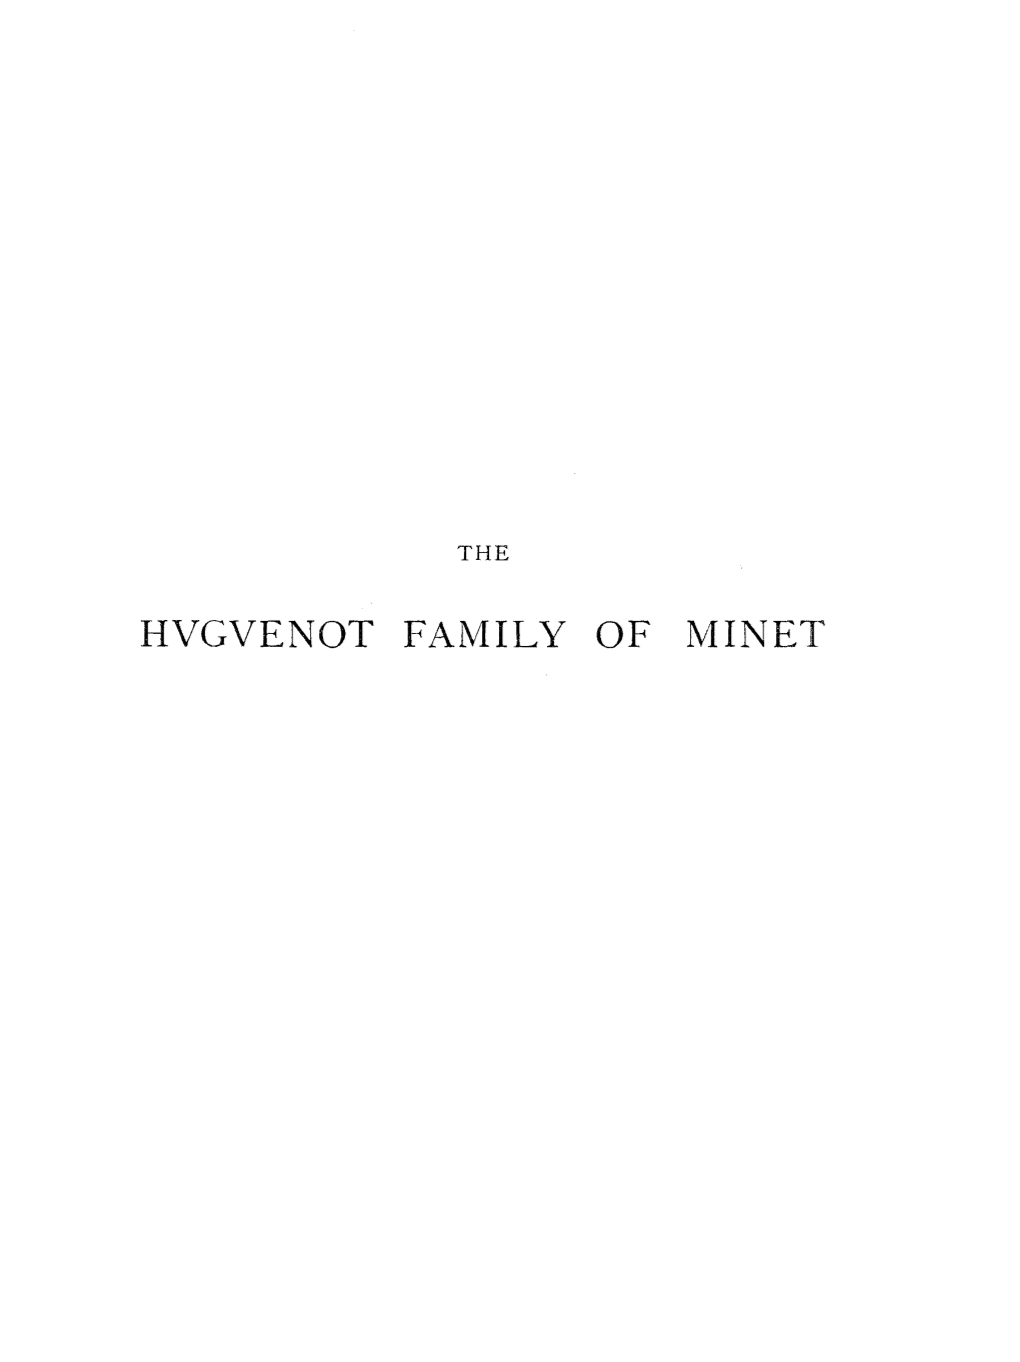 HVGVENOT FAMILY of MINET Two Hundred and Fifty Copies Privately Printed for the Author